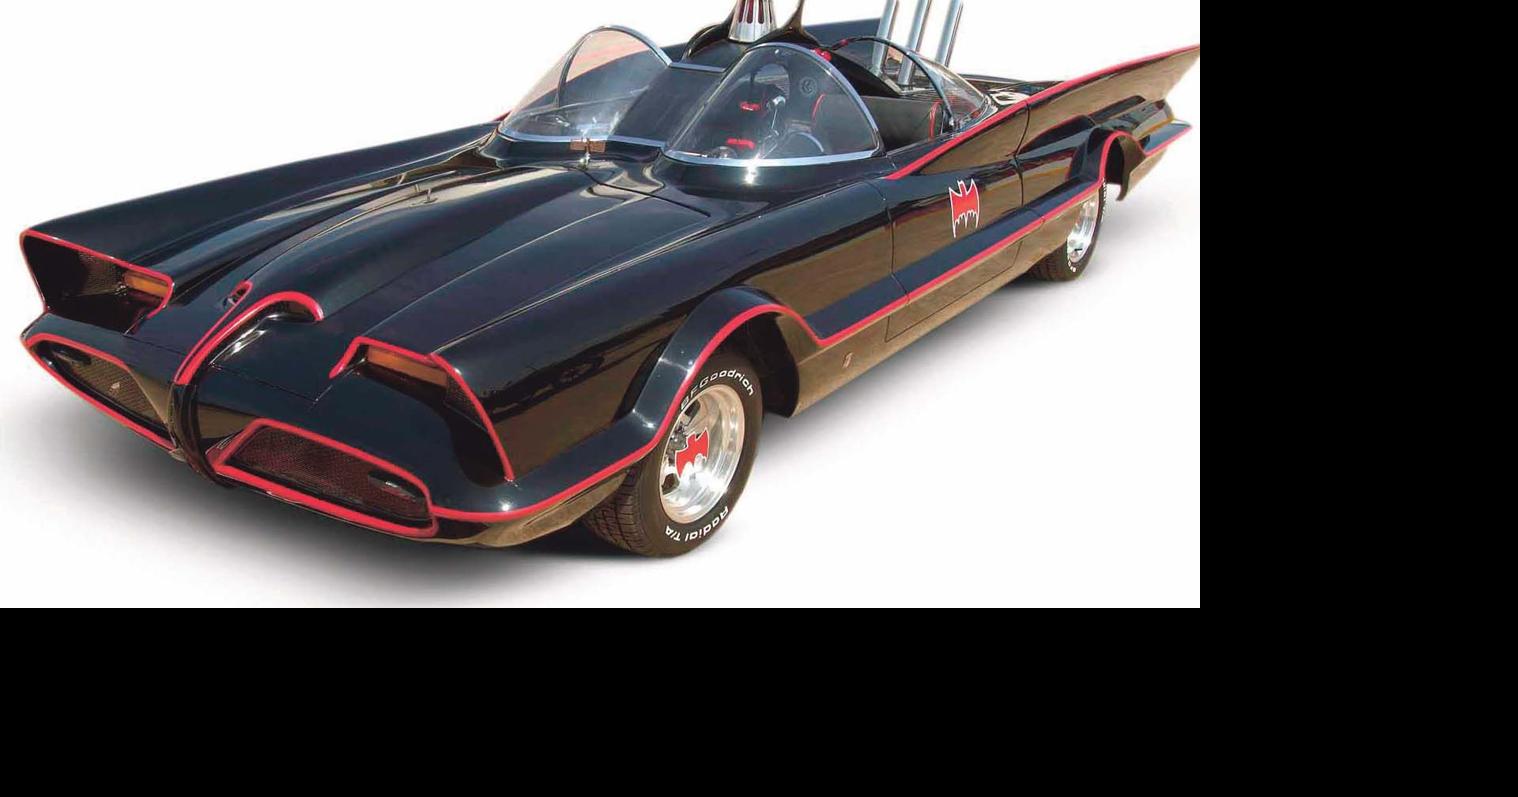 Batmobile redefined 'cool car' in 1966